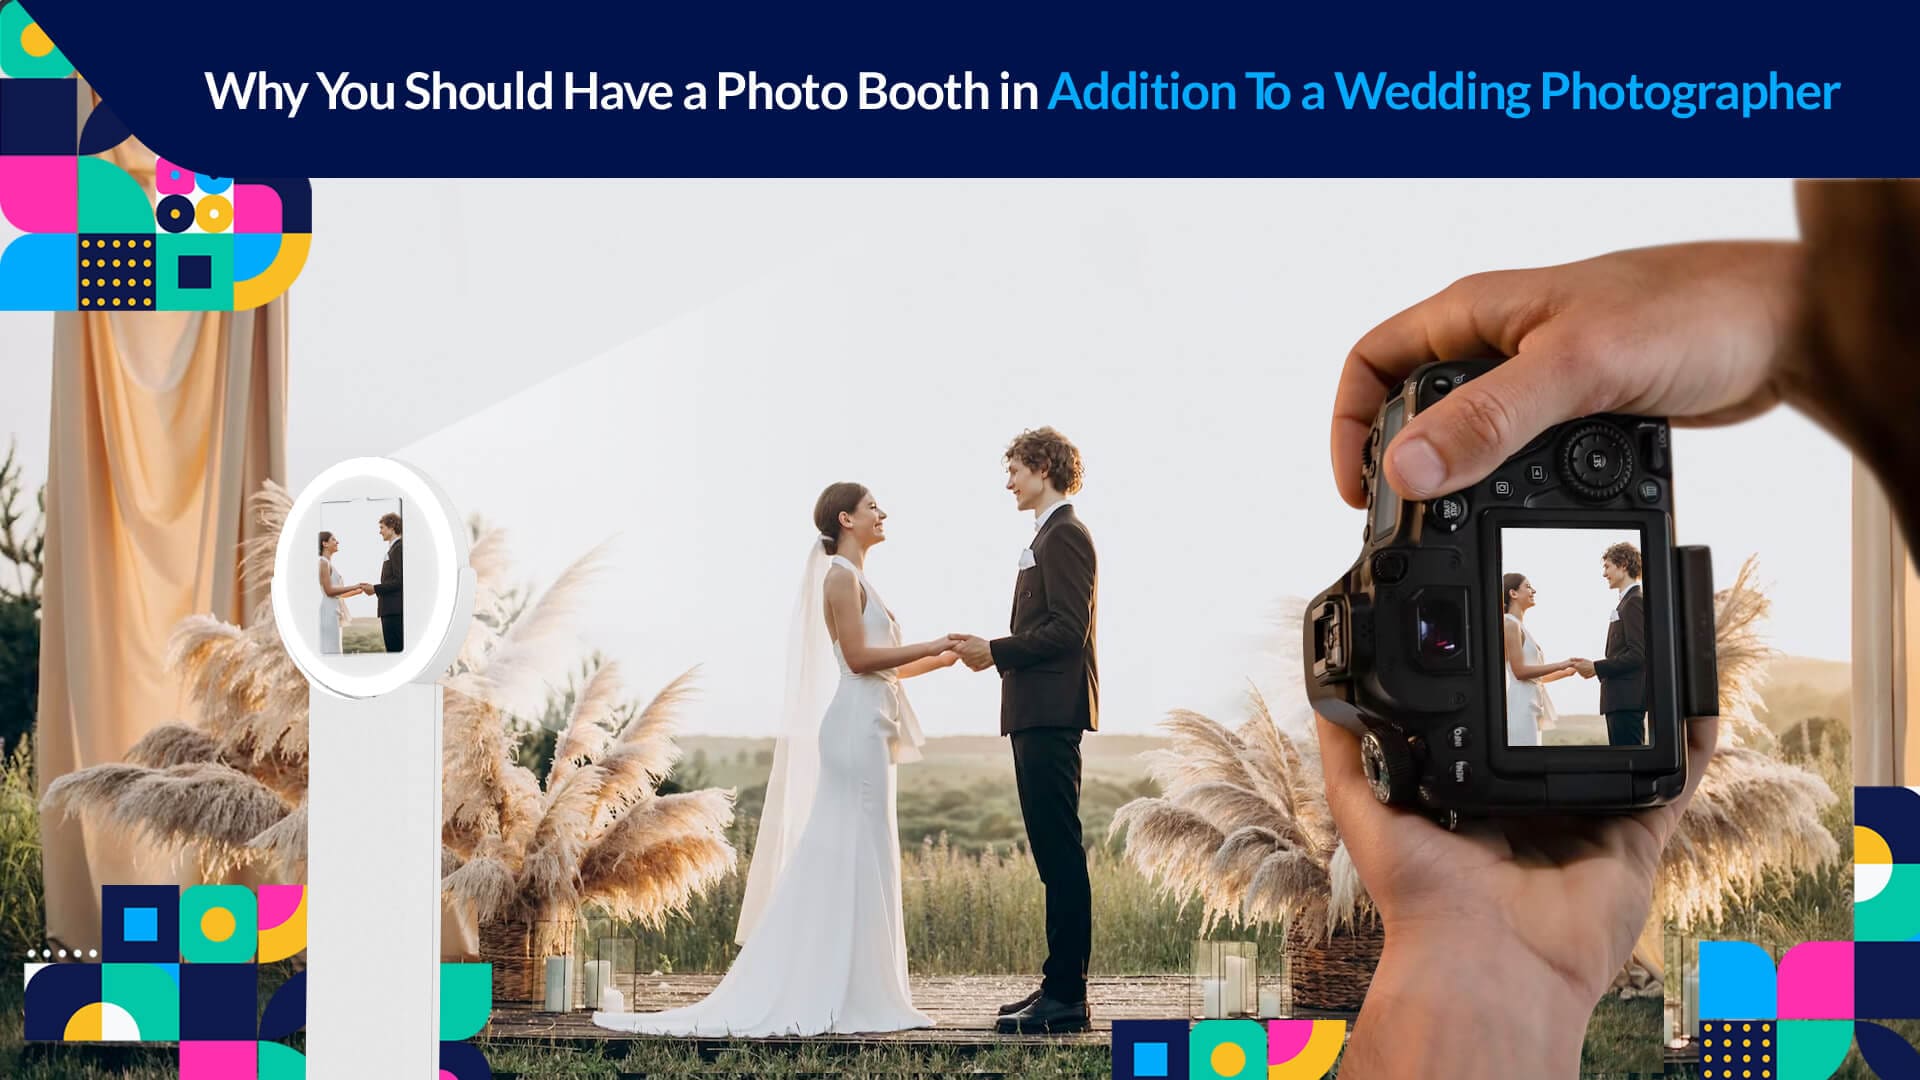 Why you should have a photo booth for fun and memorable moments at your wedding